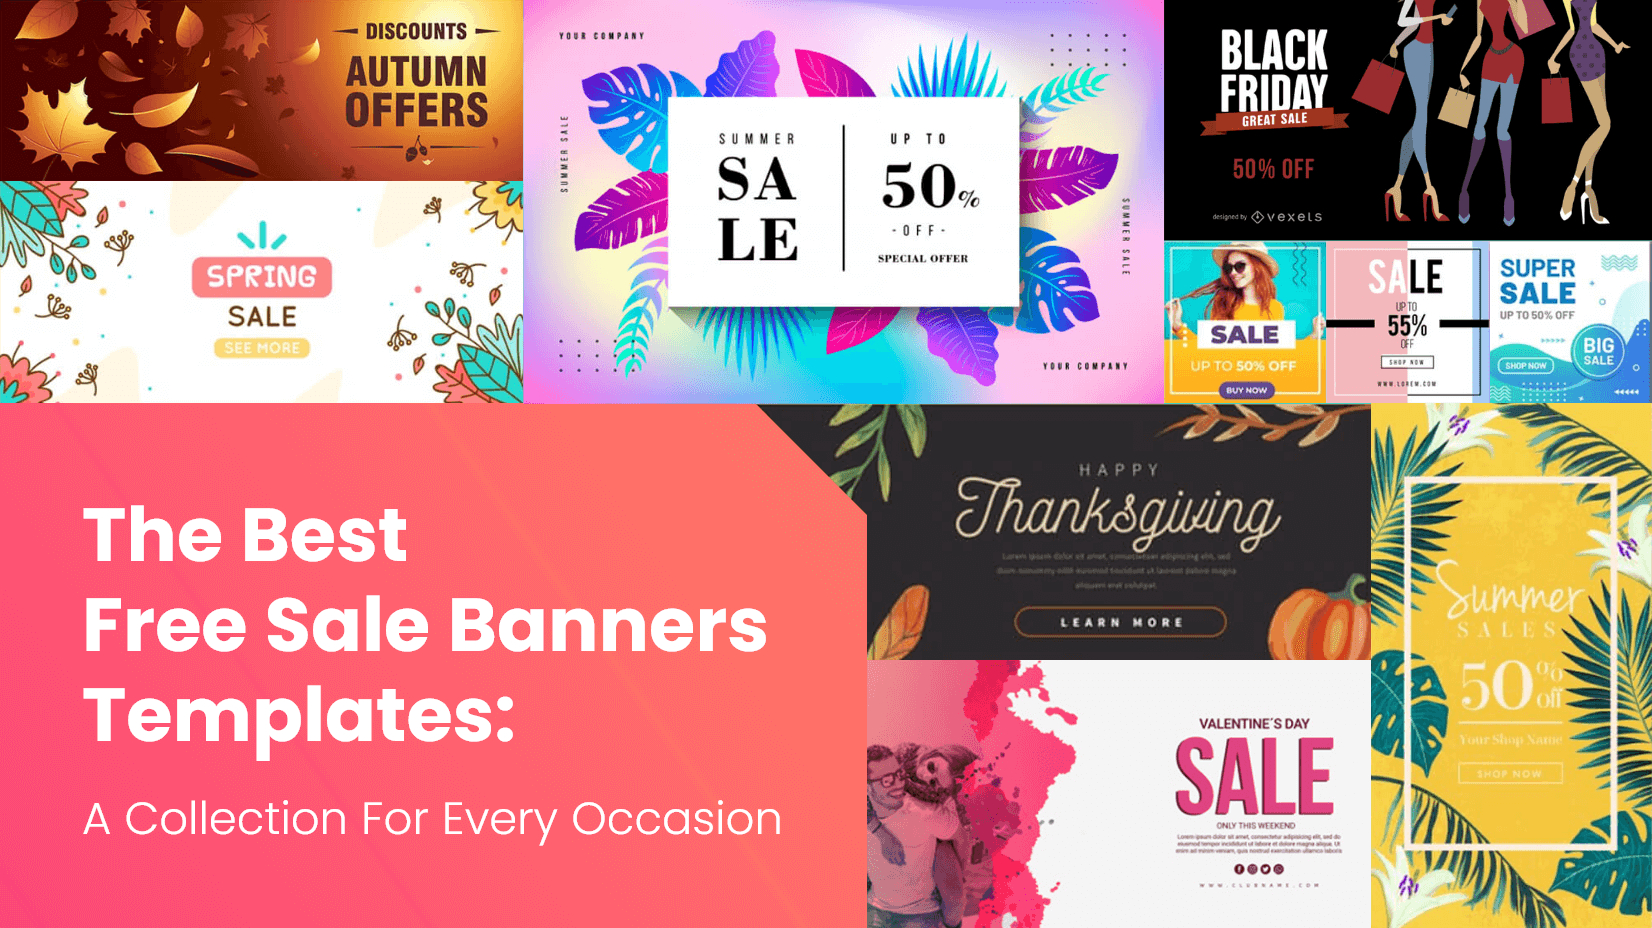 The Best Free Sale Banners Templates: A Collection For Every Pertaining To Free Website Banner Templates Download